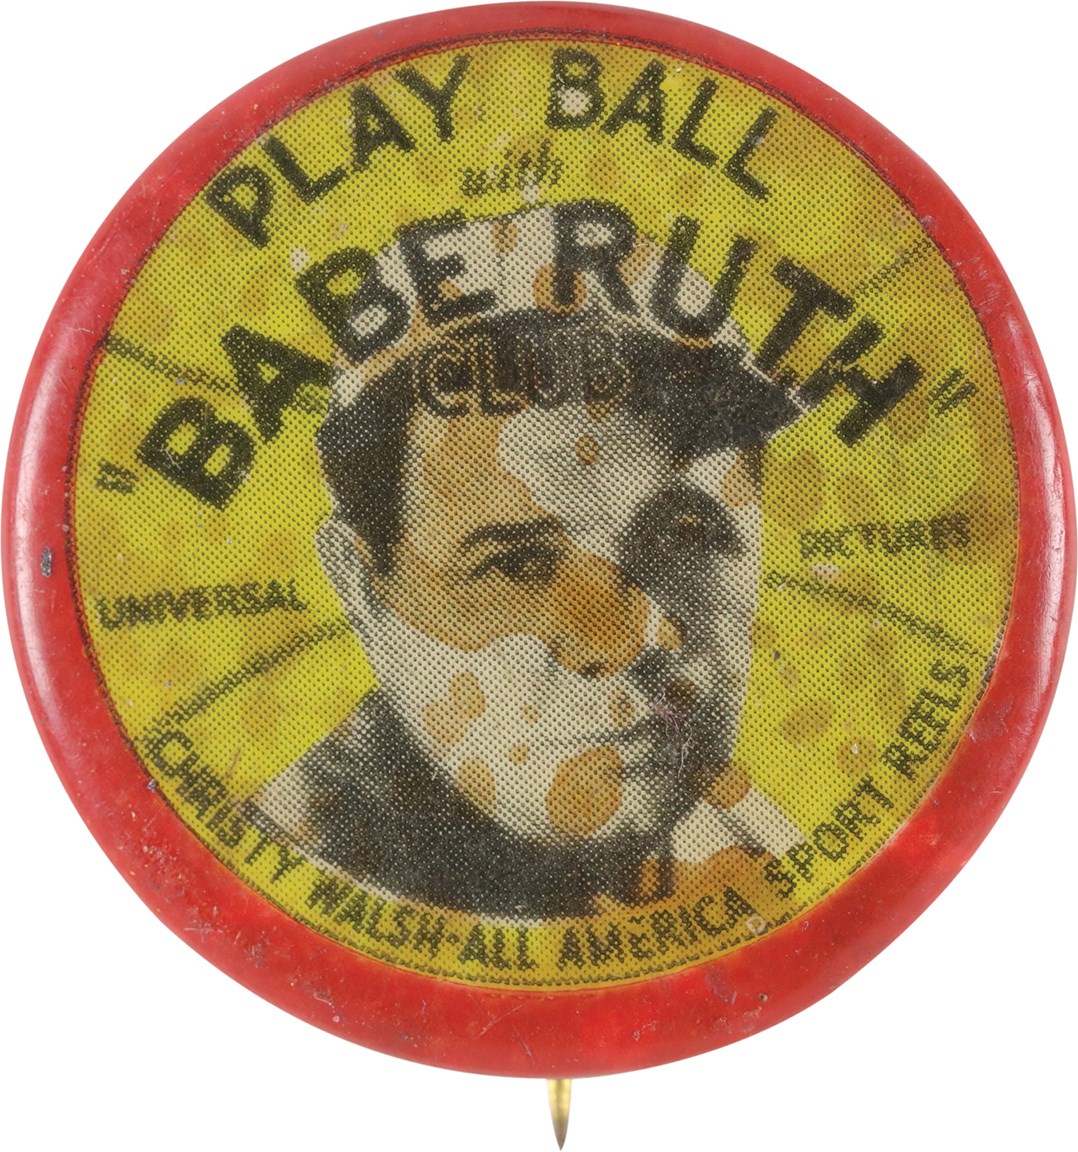 Ruth and Gehrig - 1932 Universal Pictures Babe Ruth Pin